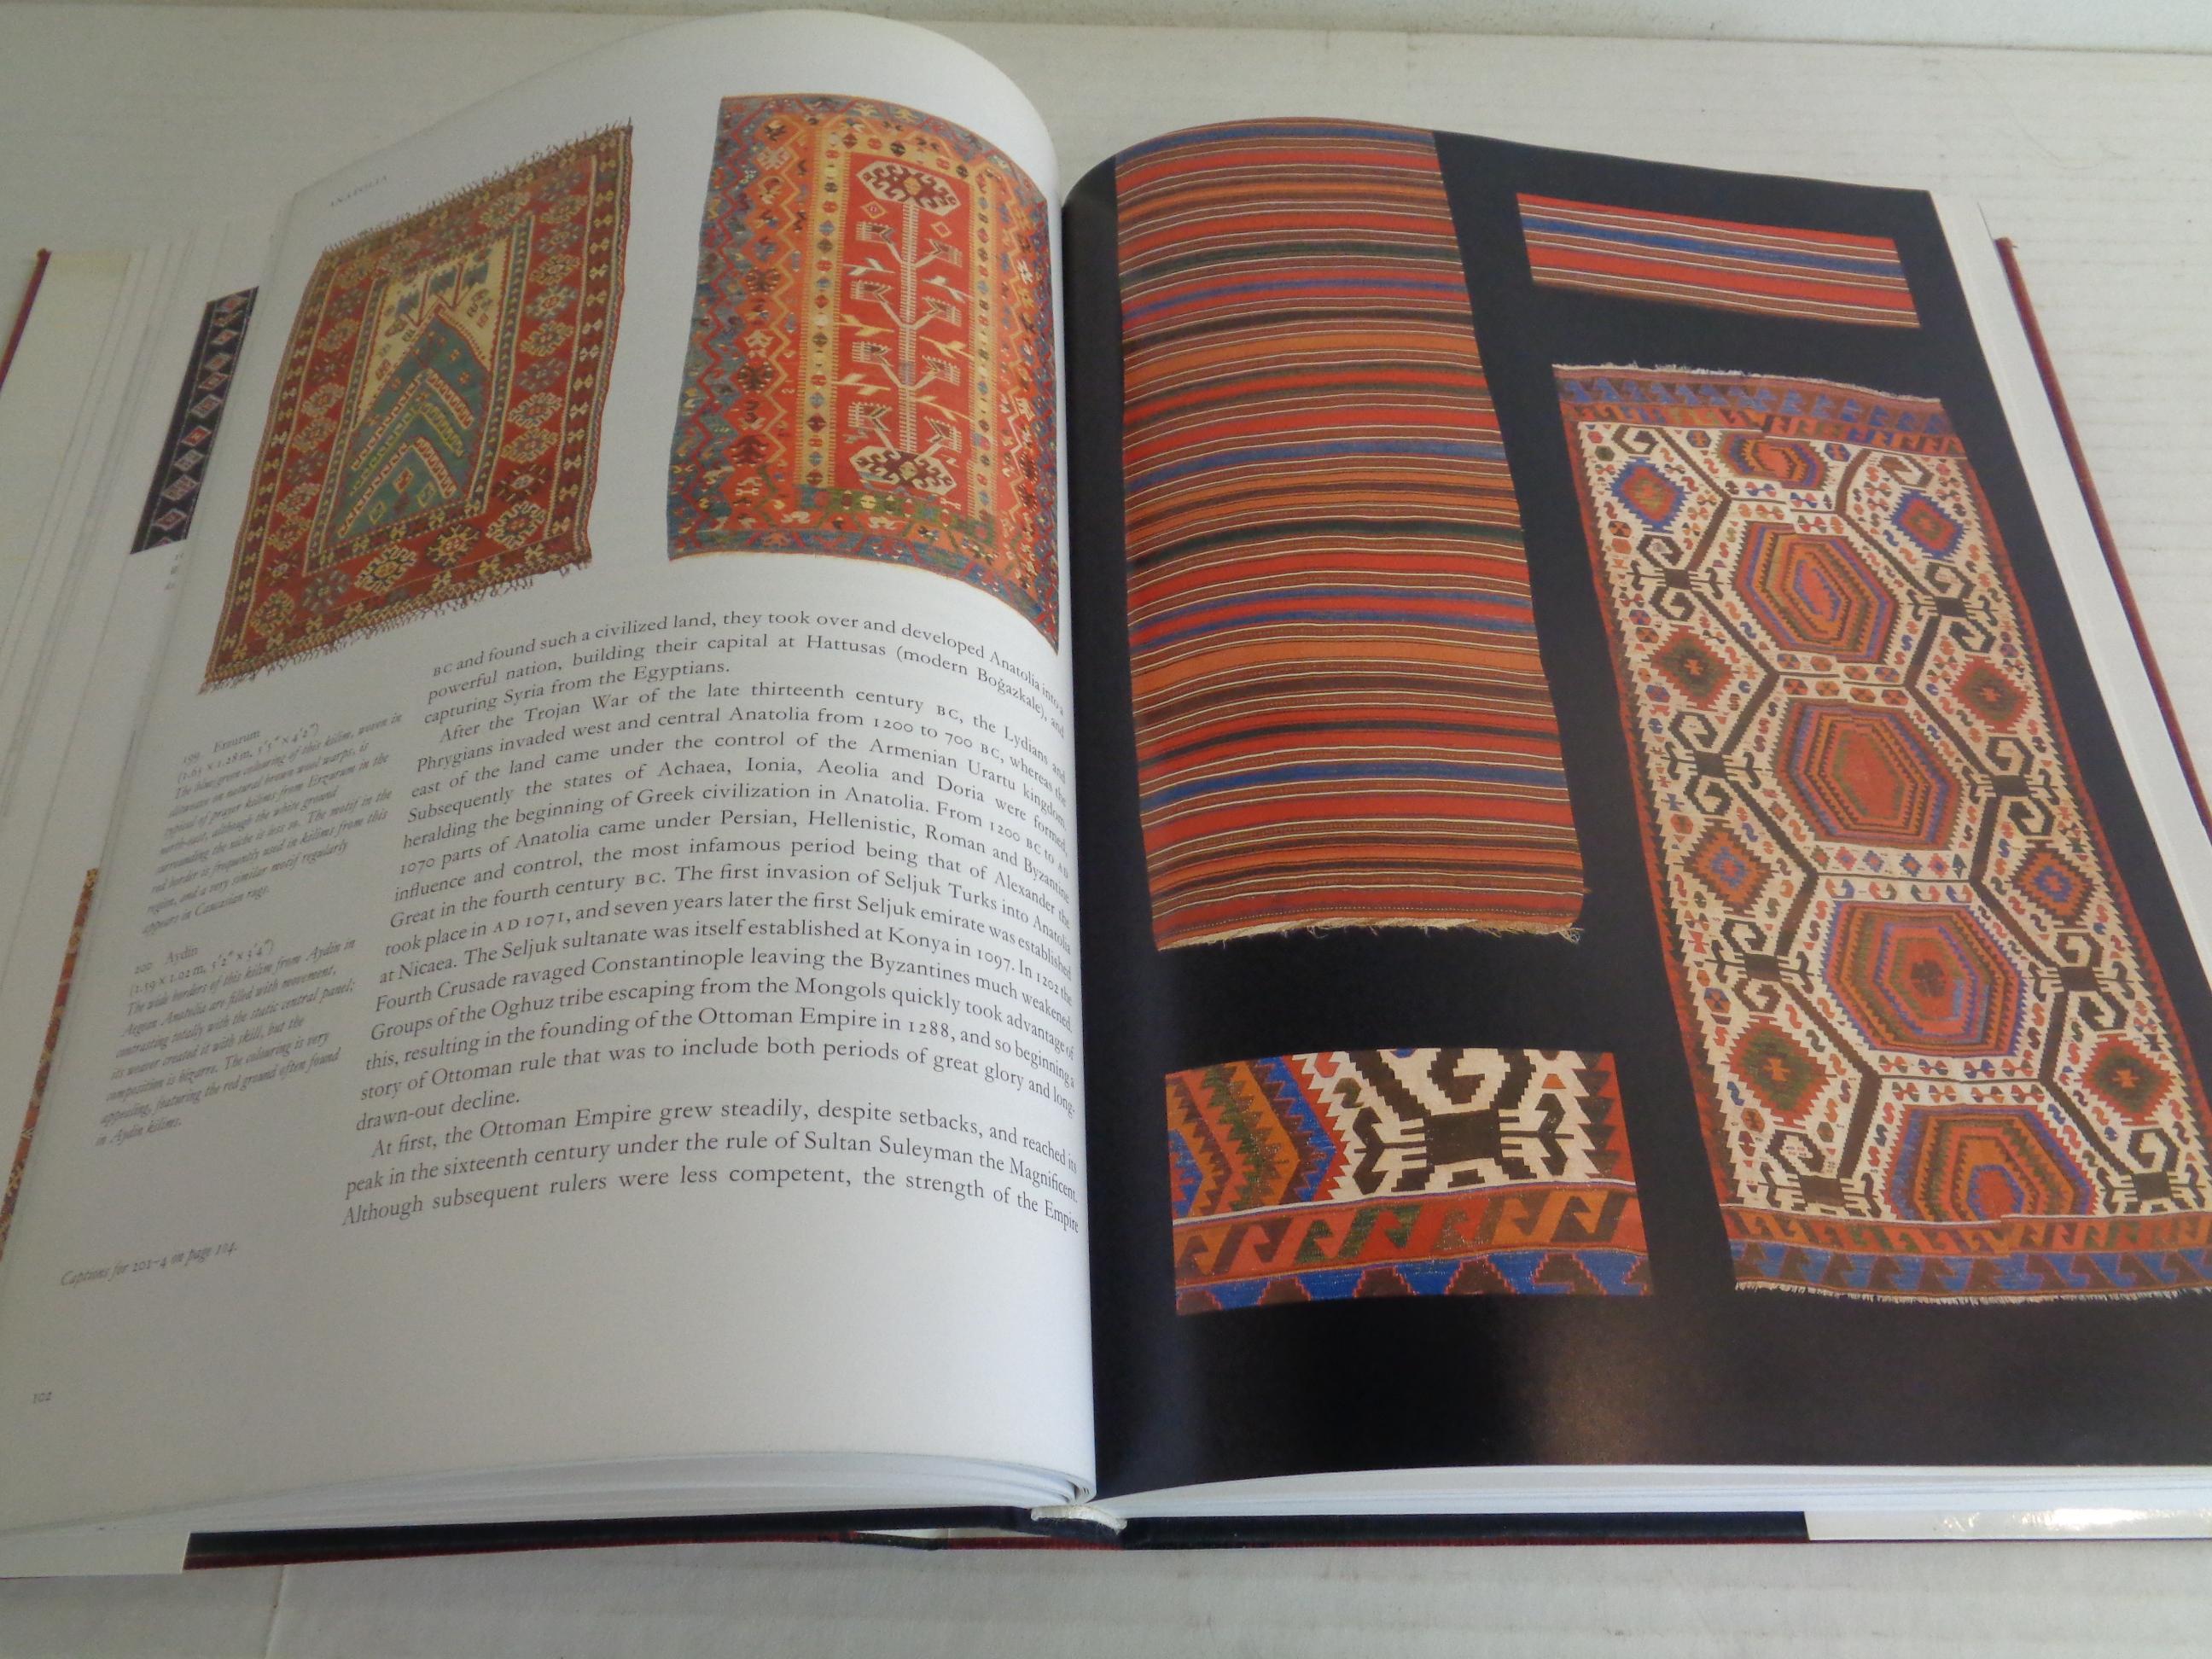 KILIM: The Complete Guide - 1993 Chronicle Books - 1st Edition For Sale 5